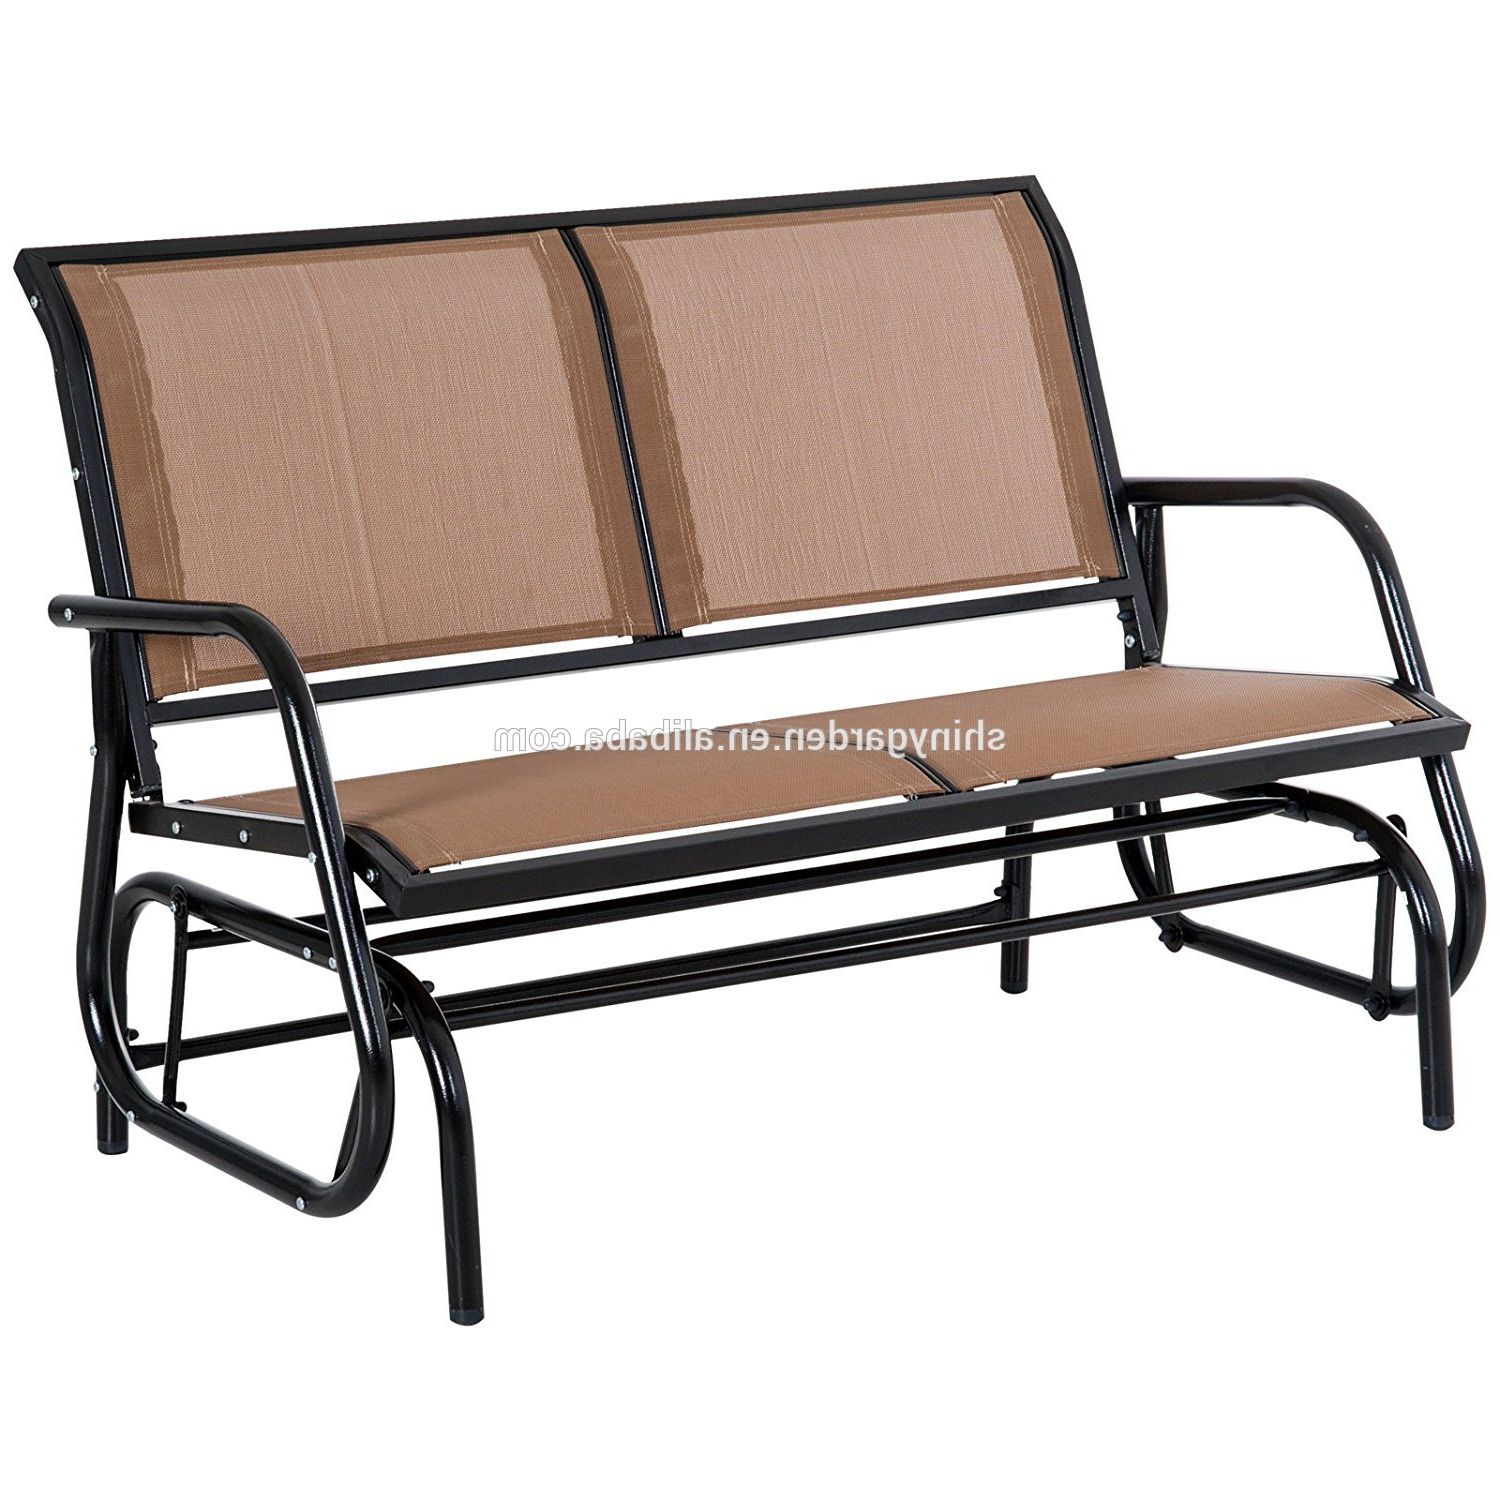 2020 Outdoor Swing Glider Chair,patio Bench For 2 Person,garden Rocking Seating  – Buy Swing Glider Chair Product On Alibaba Throughout Outdoor Patio Swing Glider Benches (View 4 of 30)